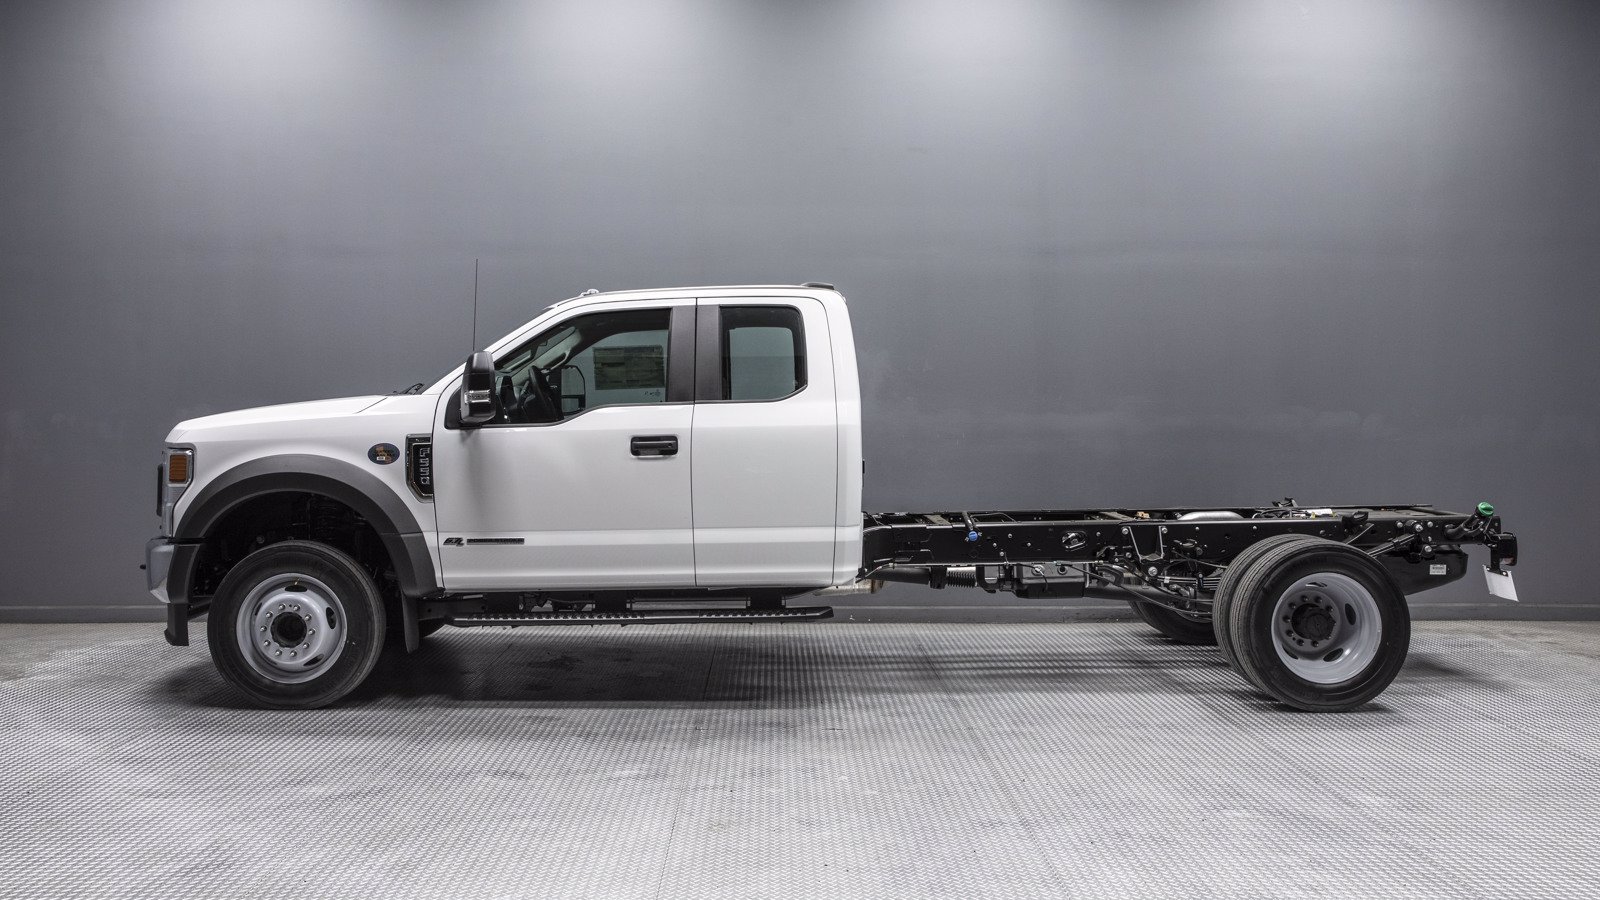 New 2020 Ford Super Duty F550 DRW XL Extended Cab ChassisCab in Buena